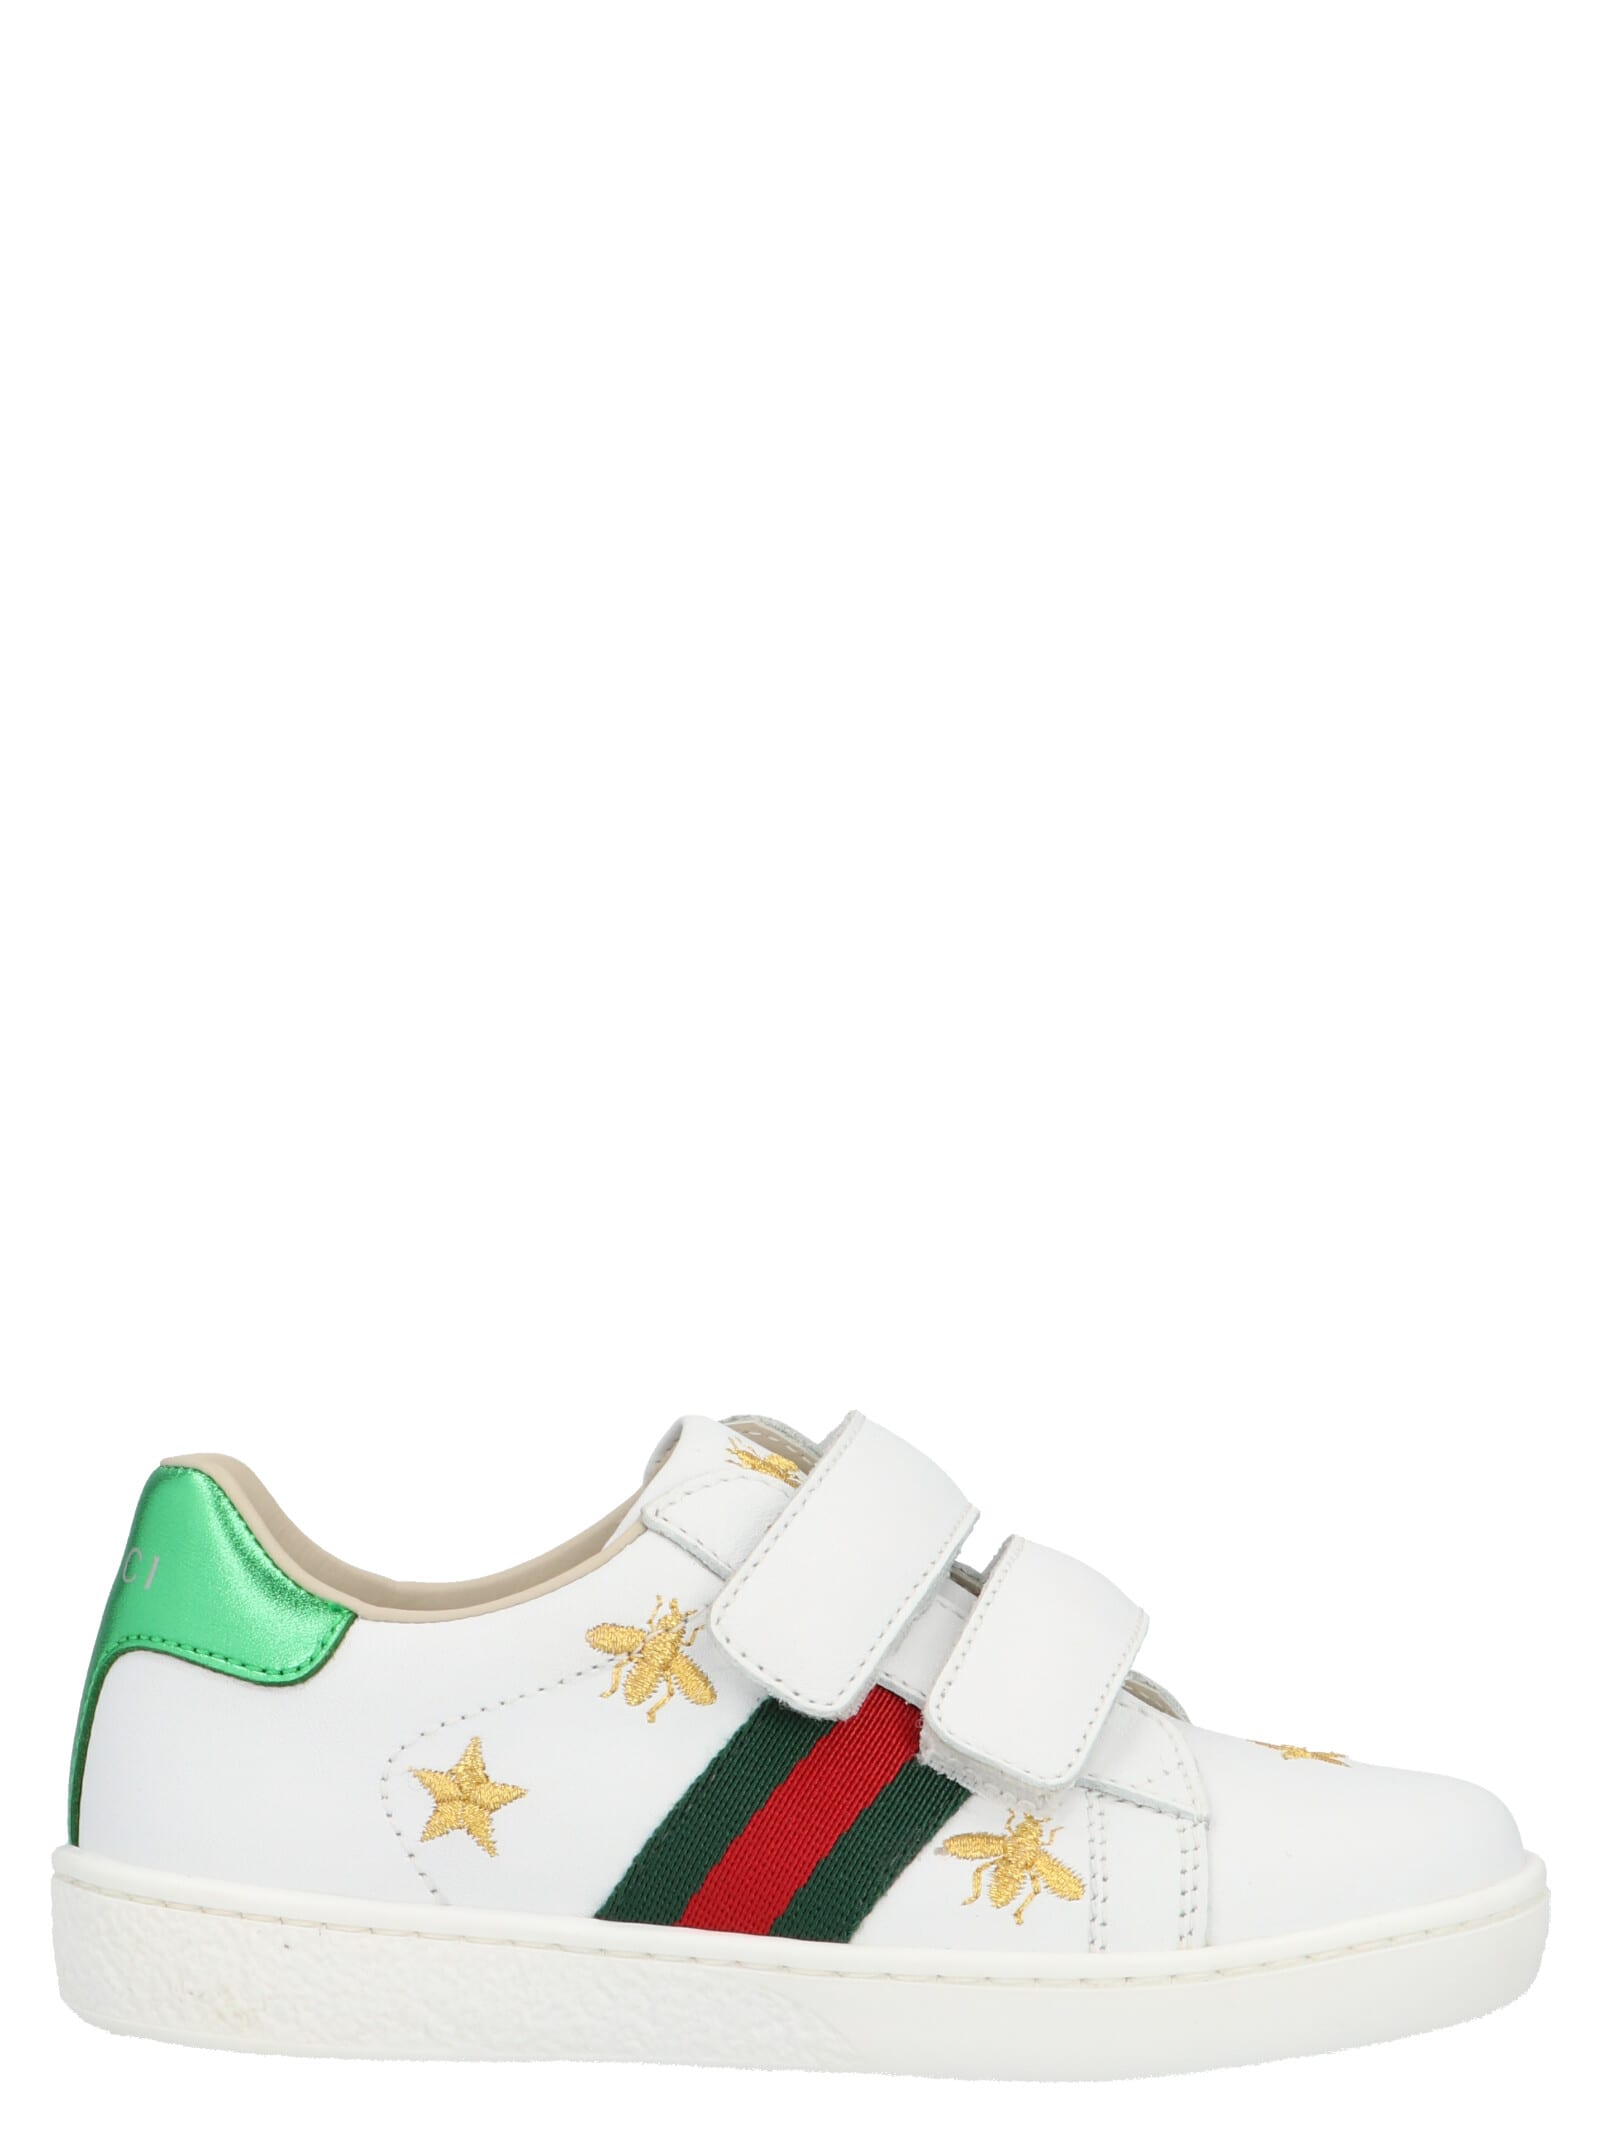 GUCCI NEW ACE SHOES,5044980II40 9064